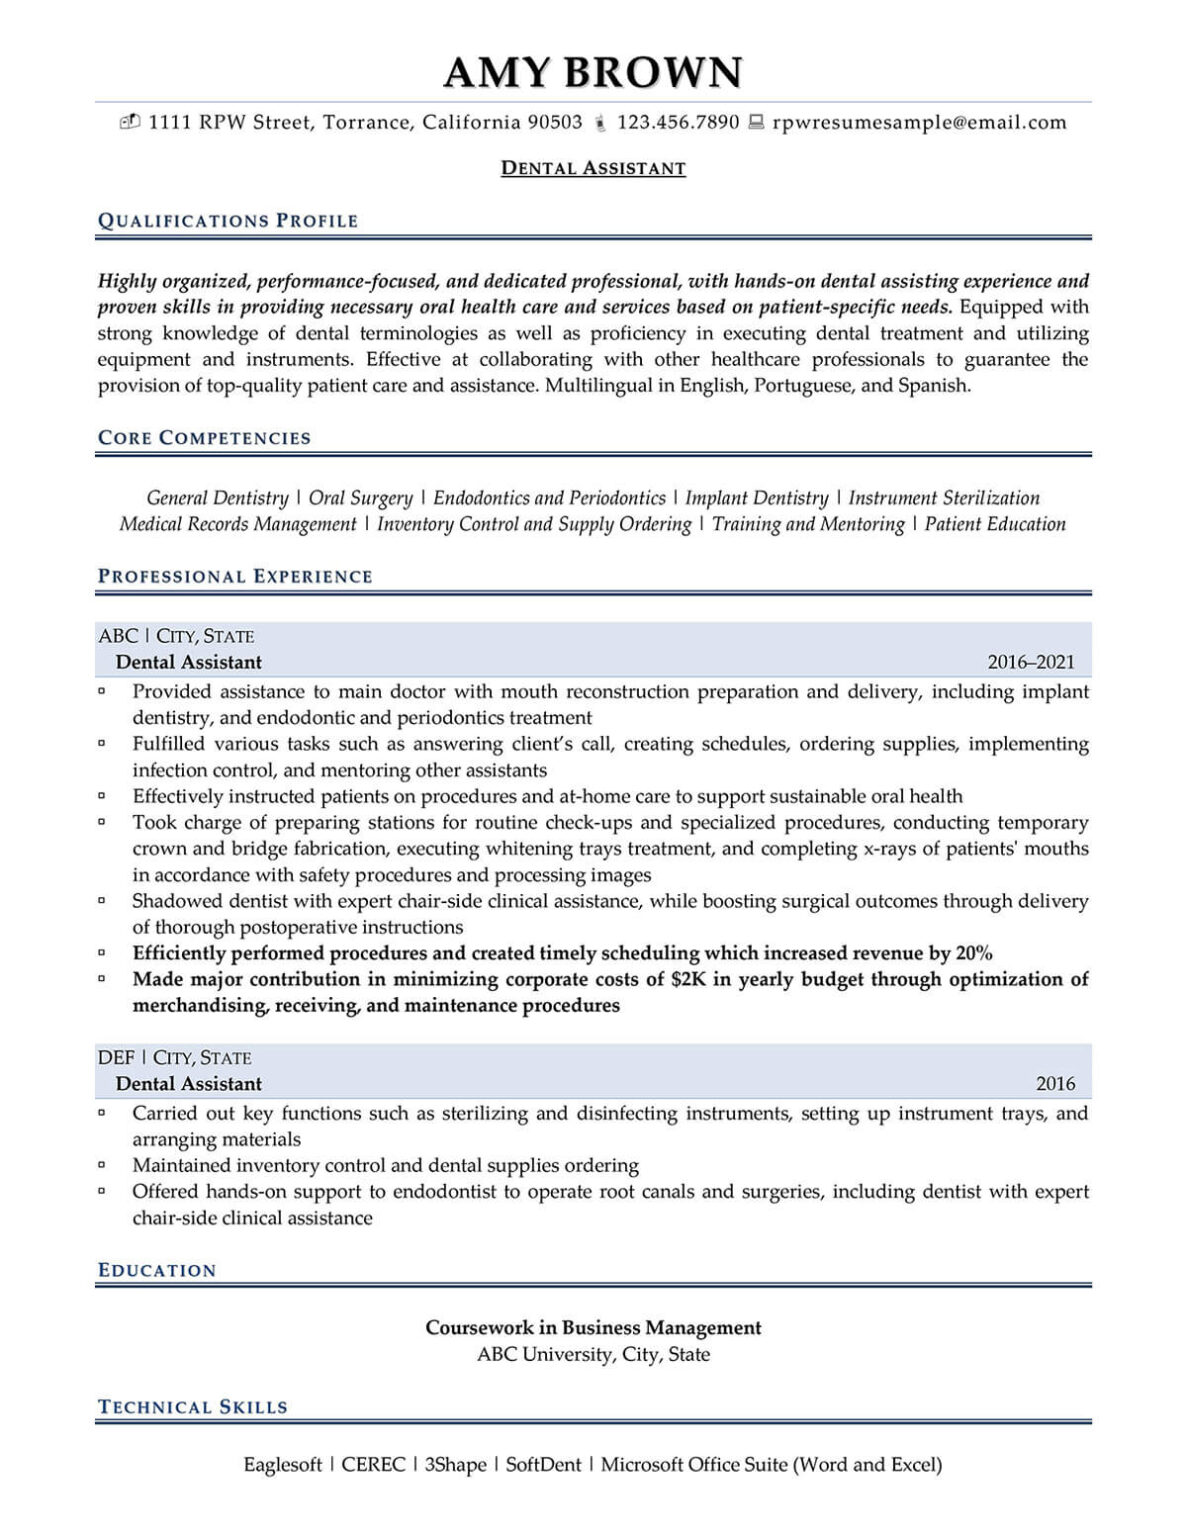 how to write resume for dental assistant